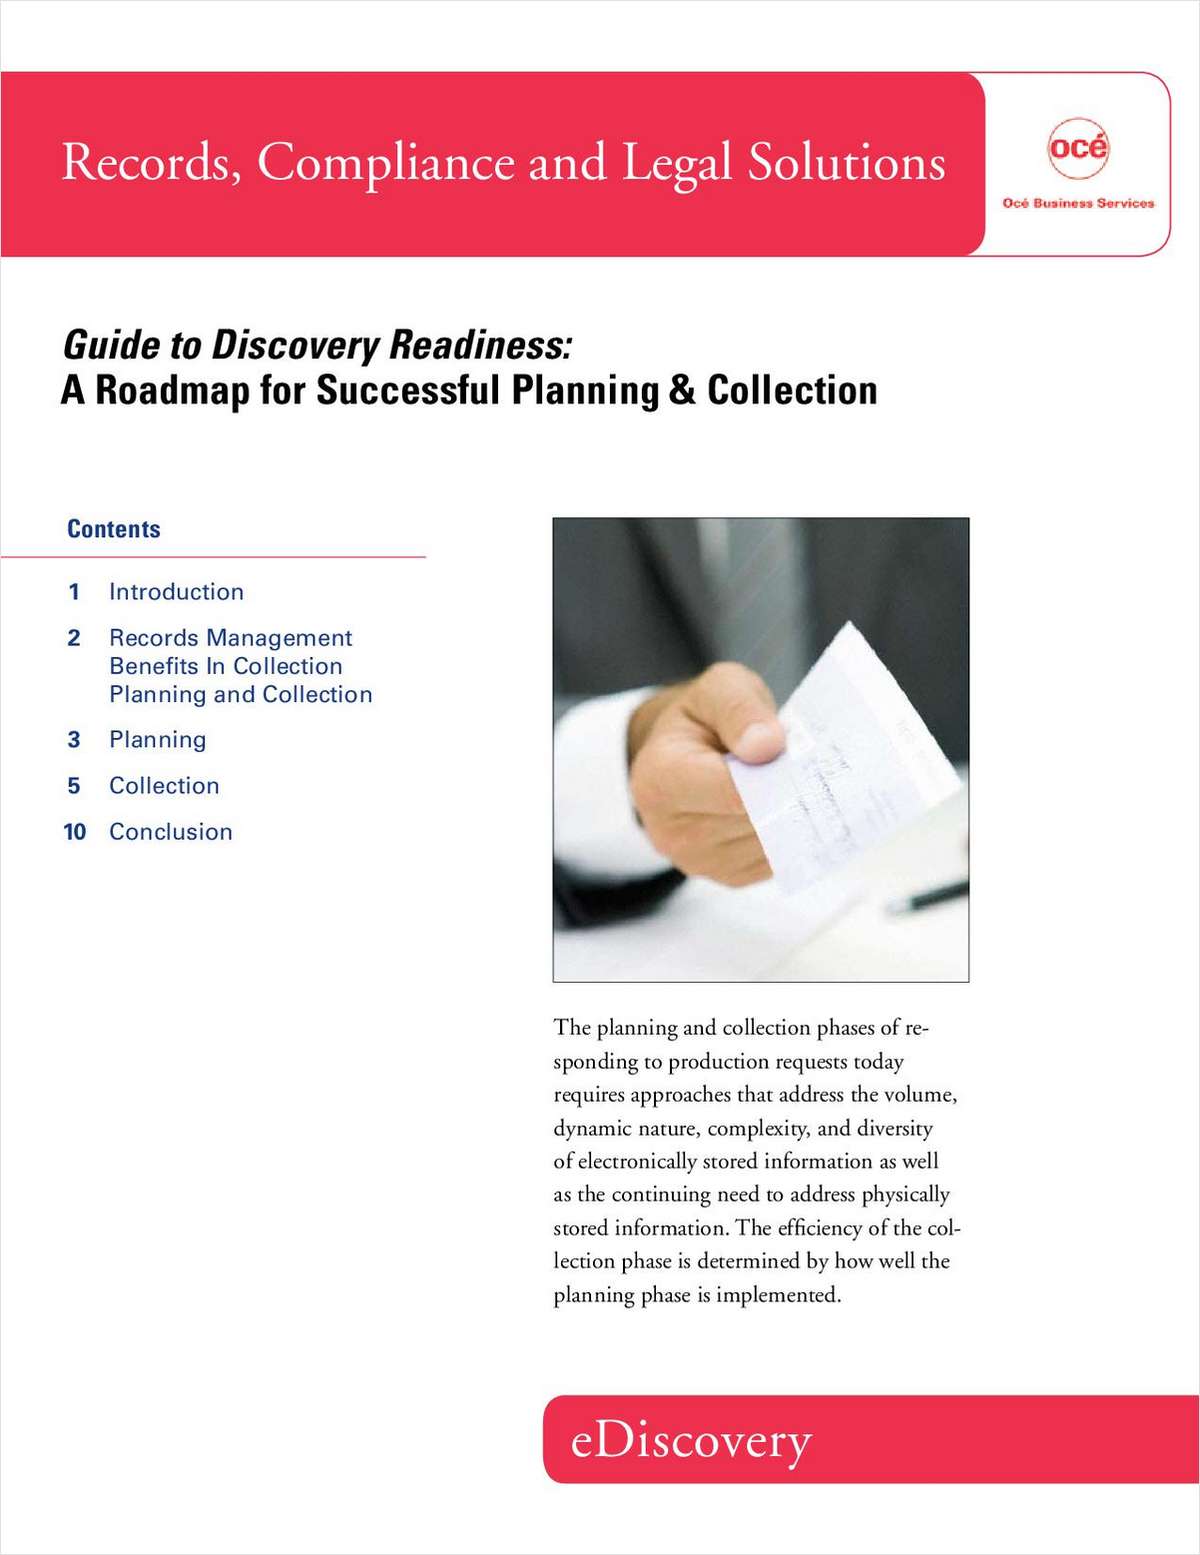 Discovery Readiness: A Roadmap for Successful Planning and Collection